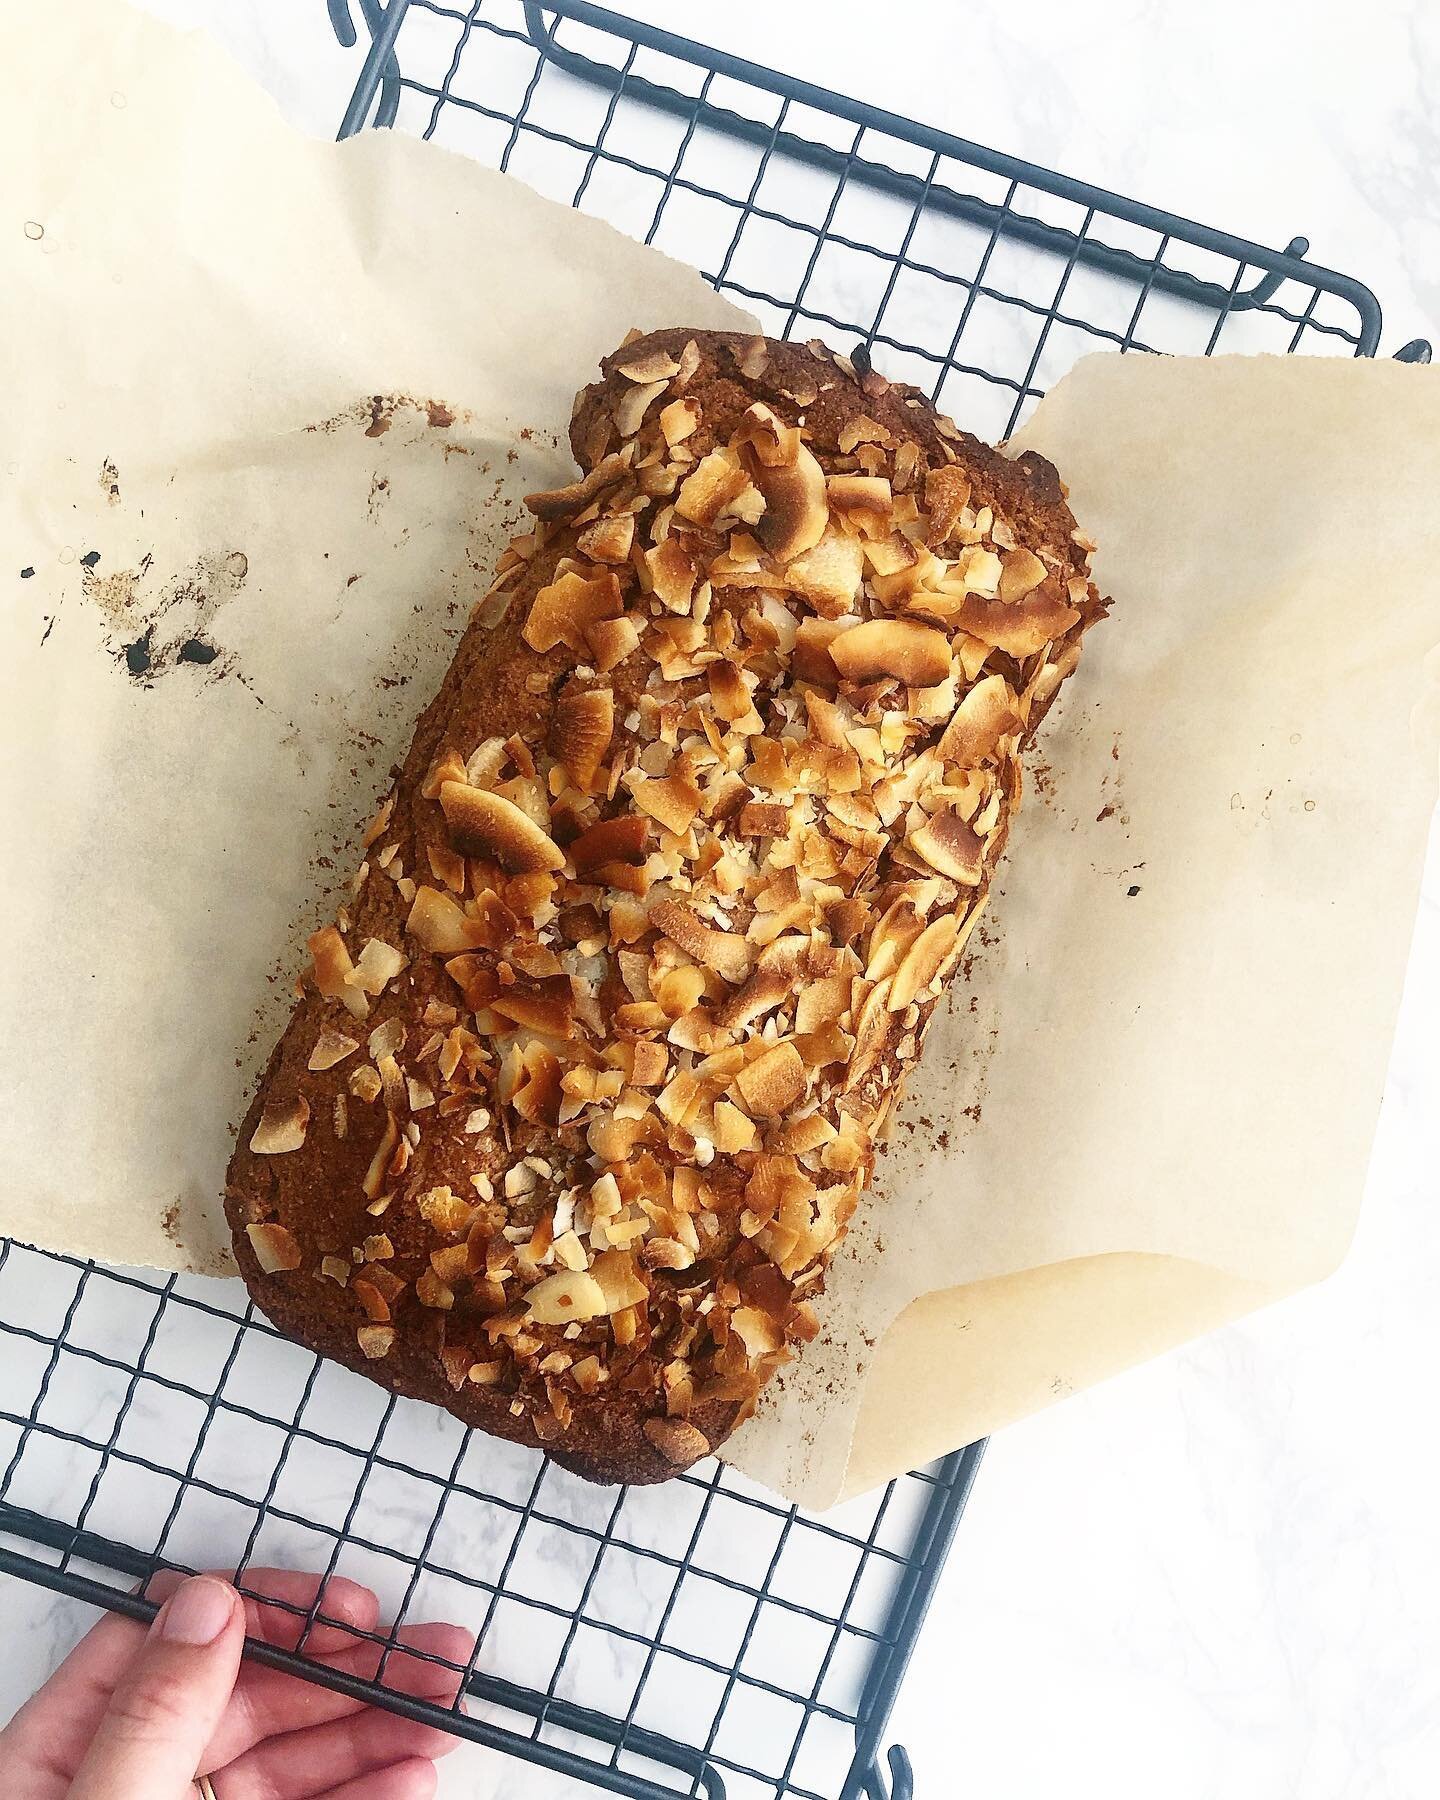 //BANANA BREAD no.2106700// I must have finally perfected my online  food ordering skills because I actually haven&rsquo;t had any overripe bananas to use for weeks... I did however find a bag of some I&rsquo;d frozen long long ago which were in desp